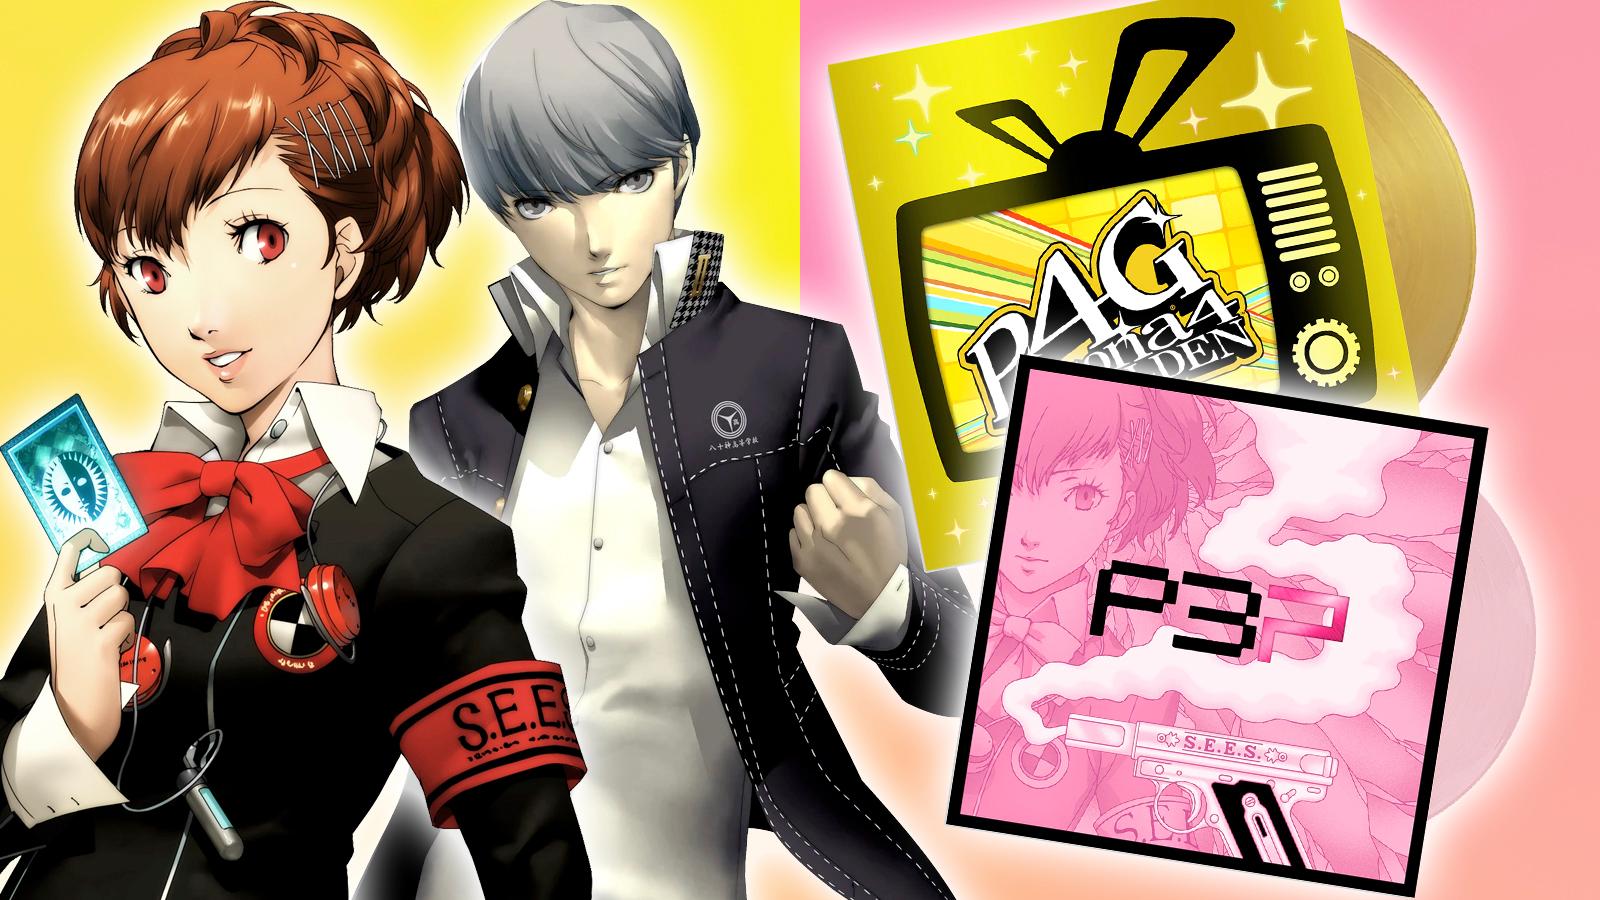 persona 4 and 3 portable protagonists next to both vinyl albums